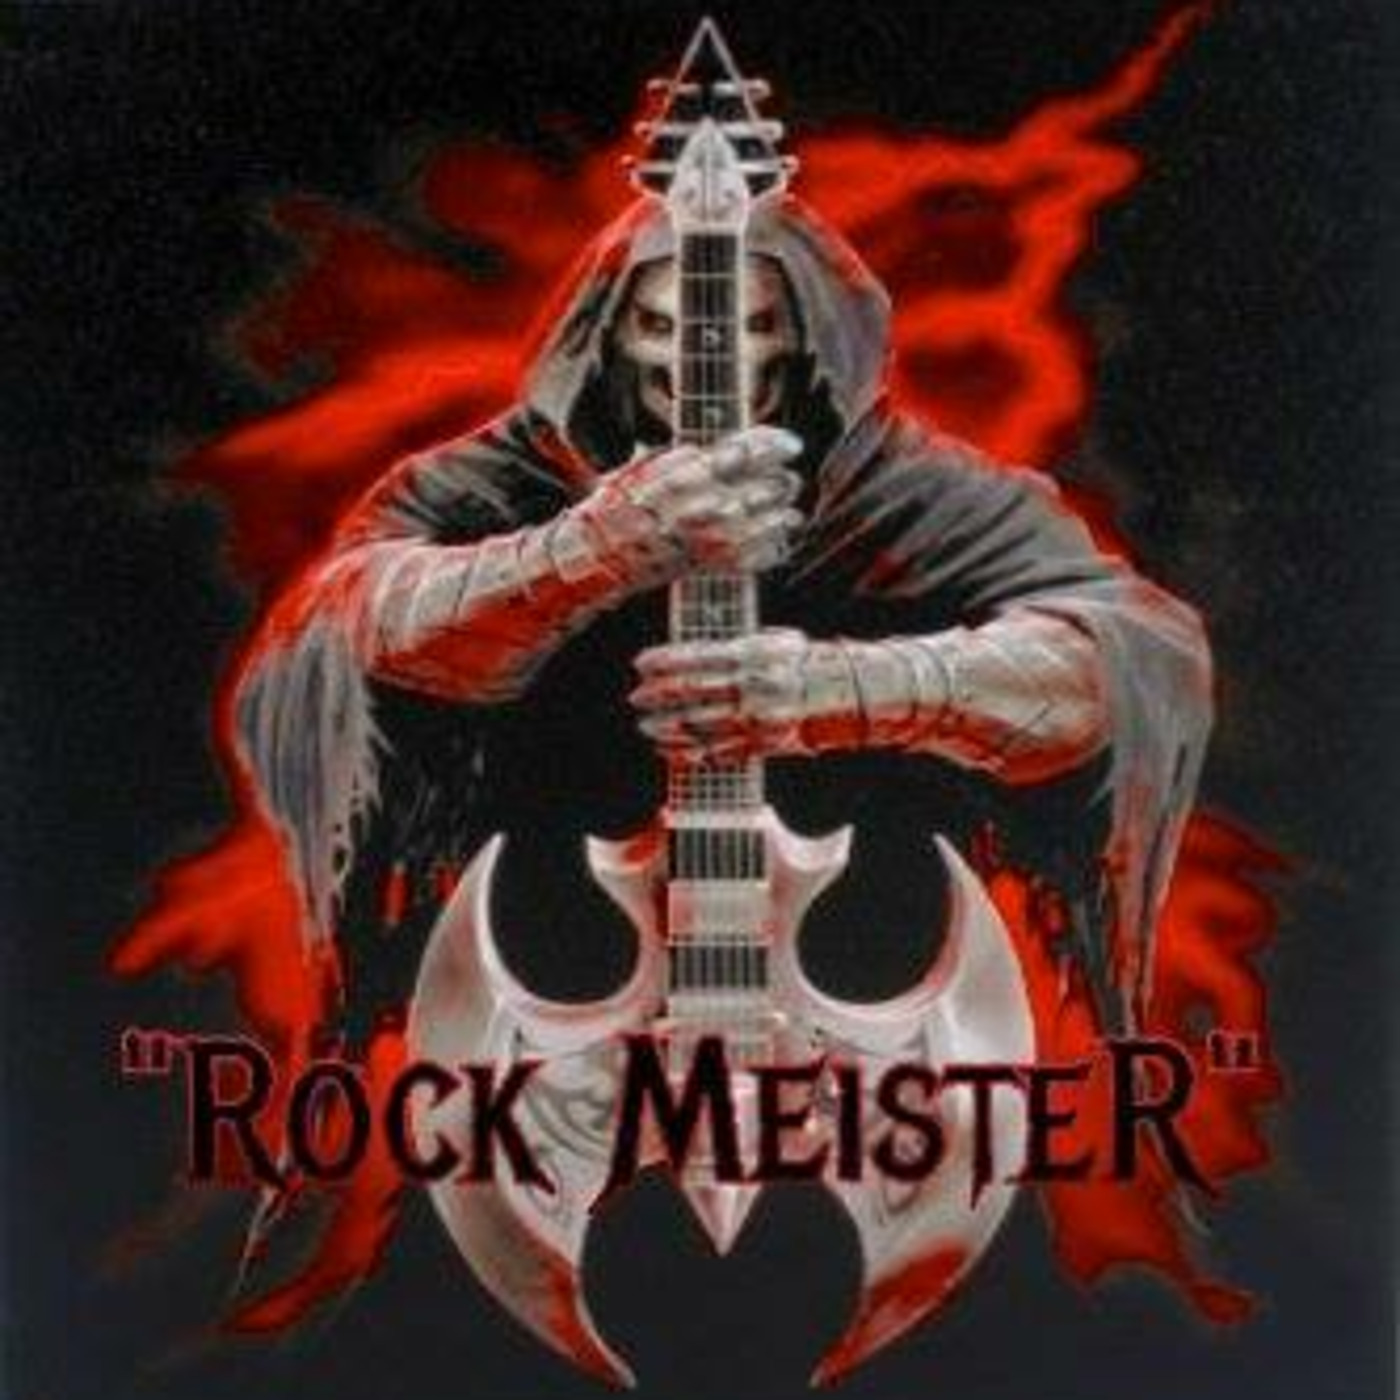 THE ROCKMEISTER'S ROCK SHOWS